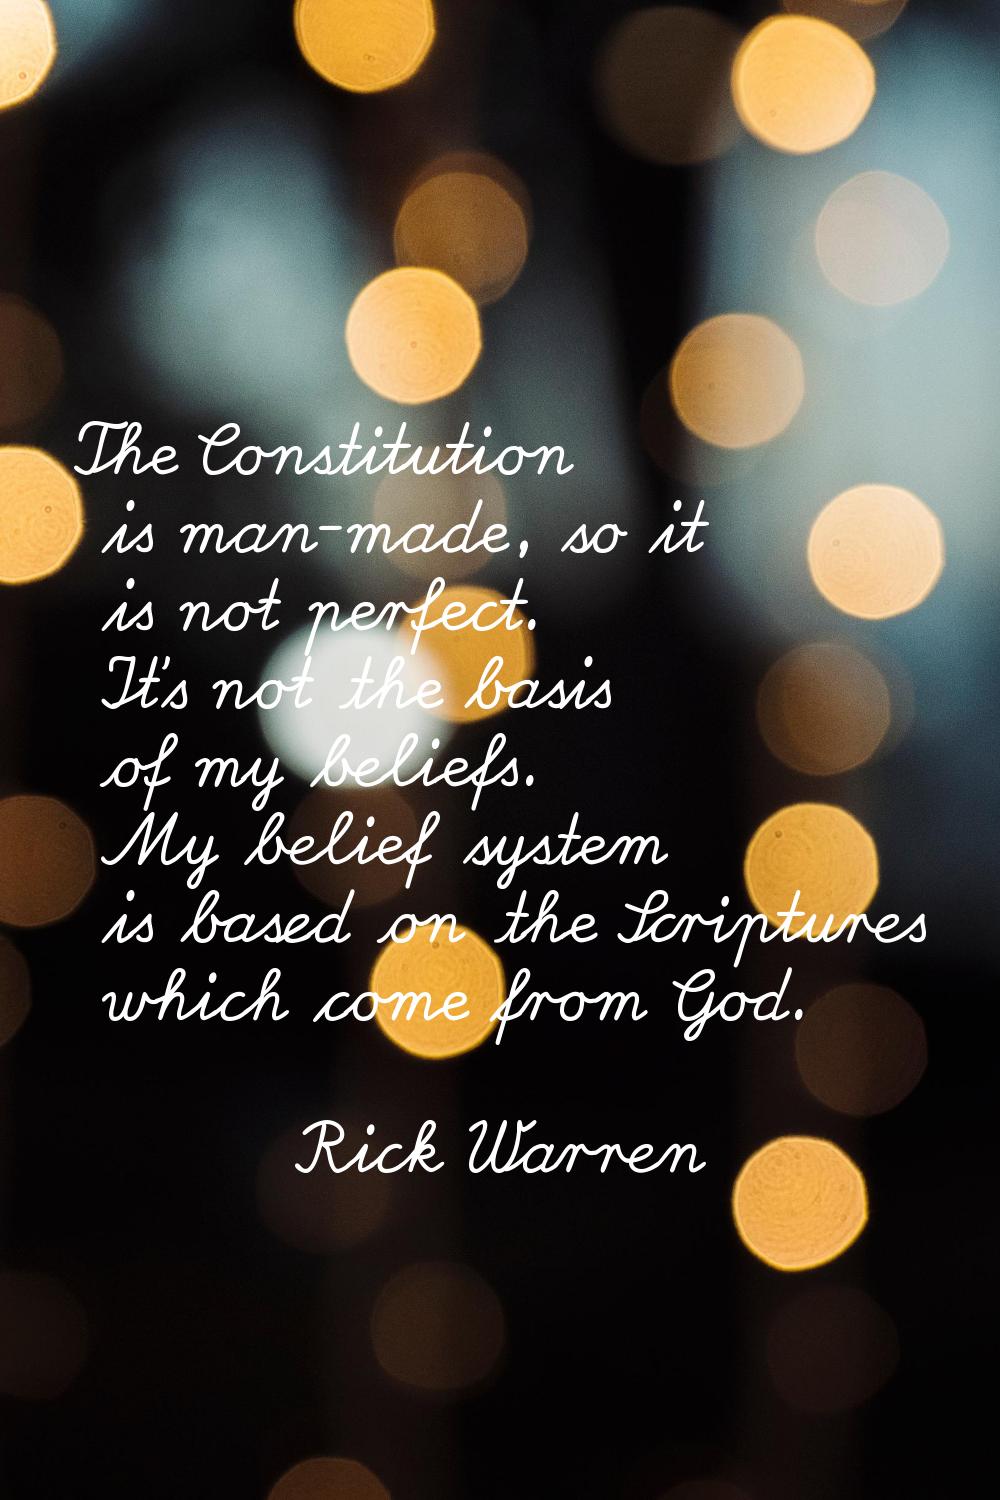 The Constitution is man-made, so it is not perfect. It's not the basis of my beliefs. My belief sys